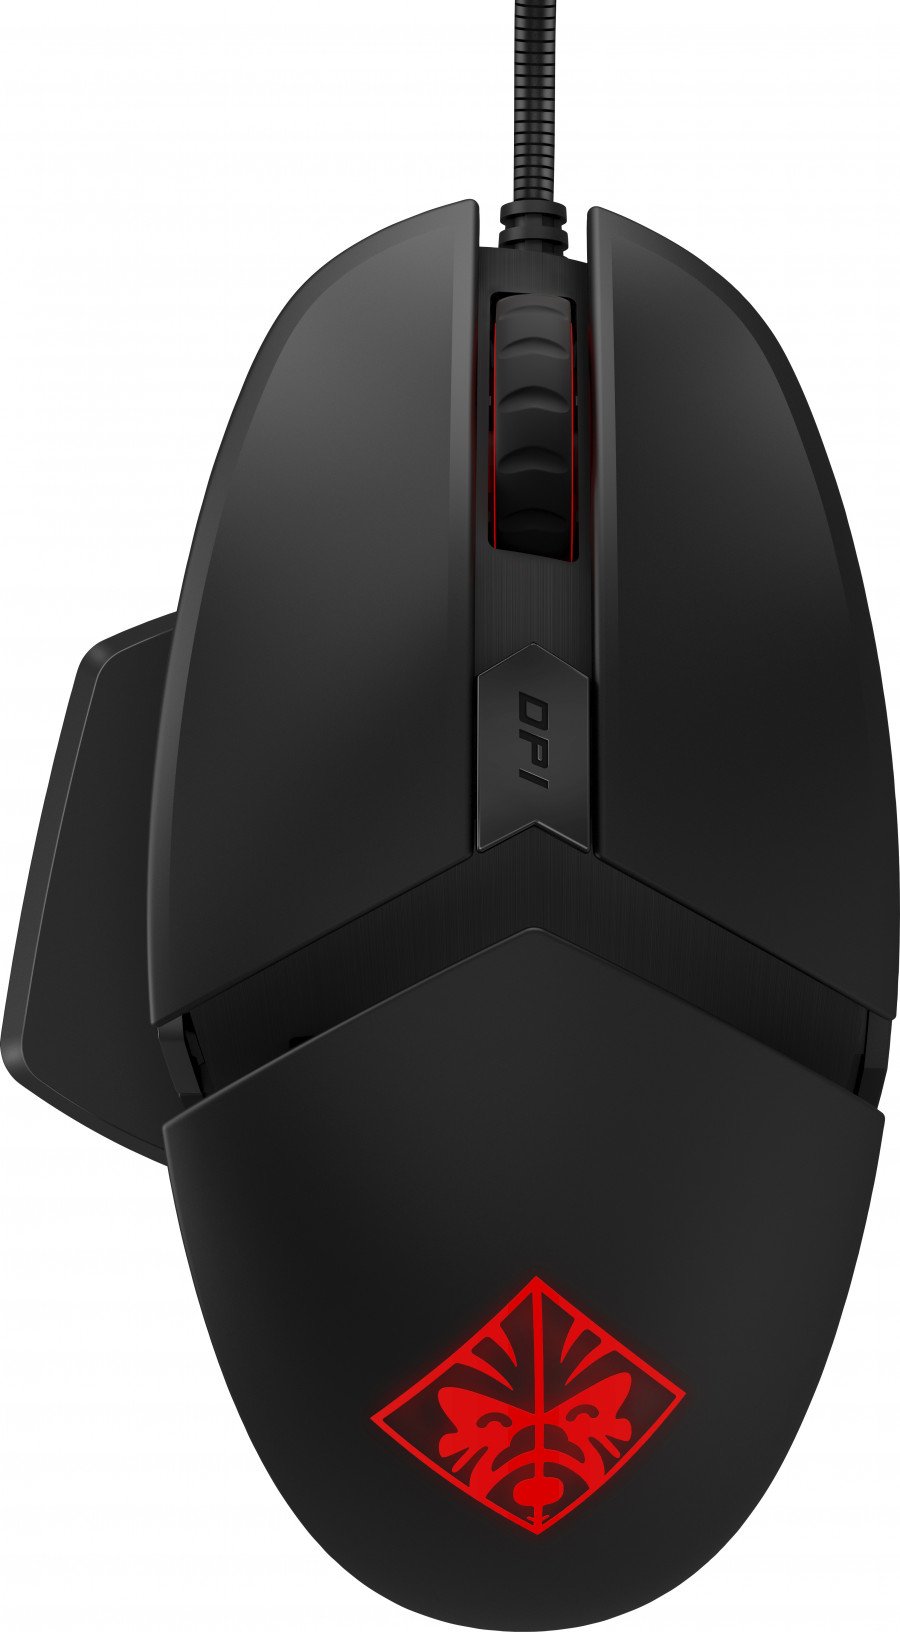 Image of Hp hewlett packard omen by hp reactor mouse omen by hp reactor mouse black OMEN by HP Reactor Mouse Componenti Informatica